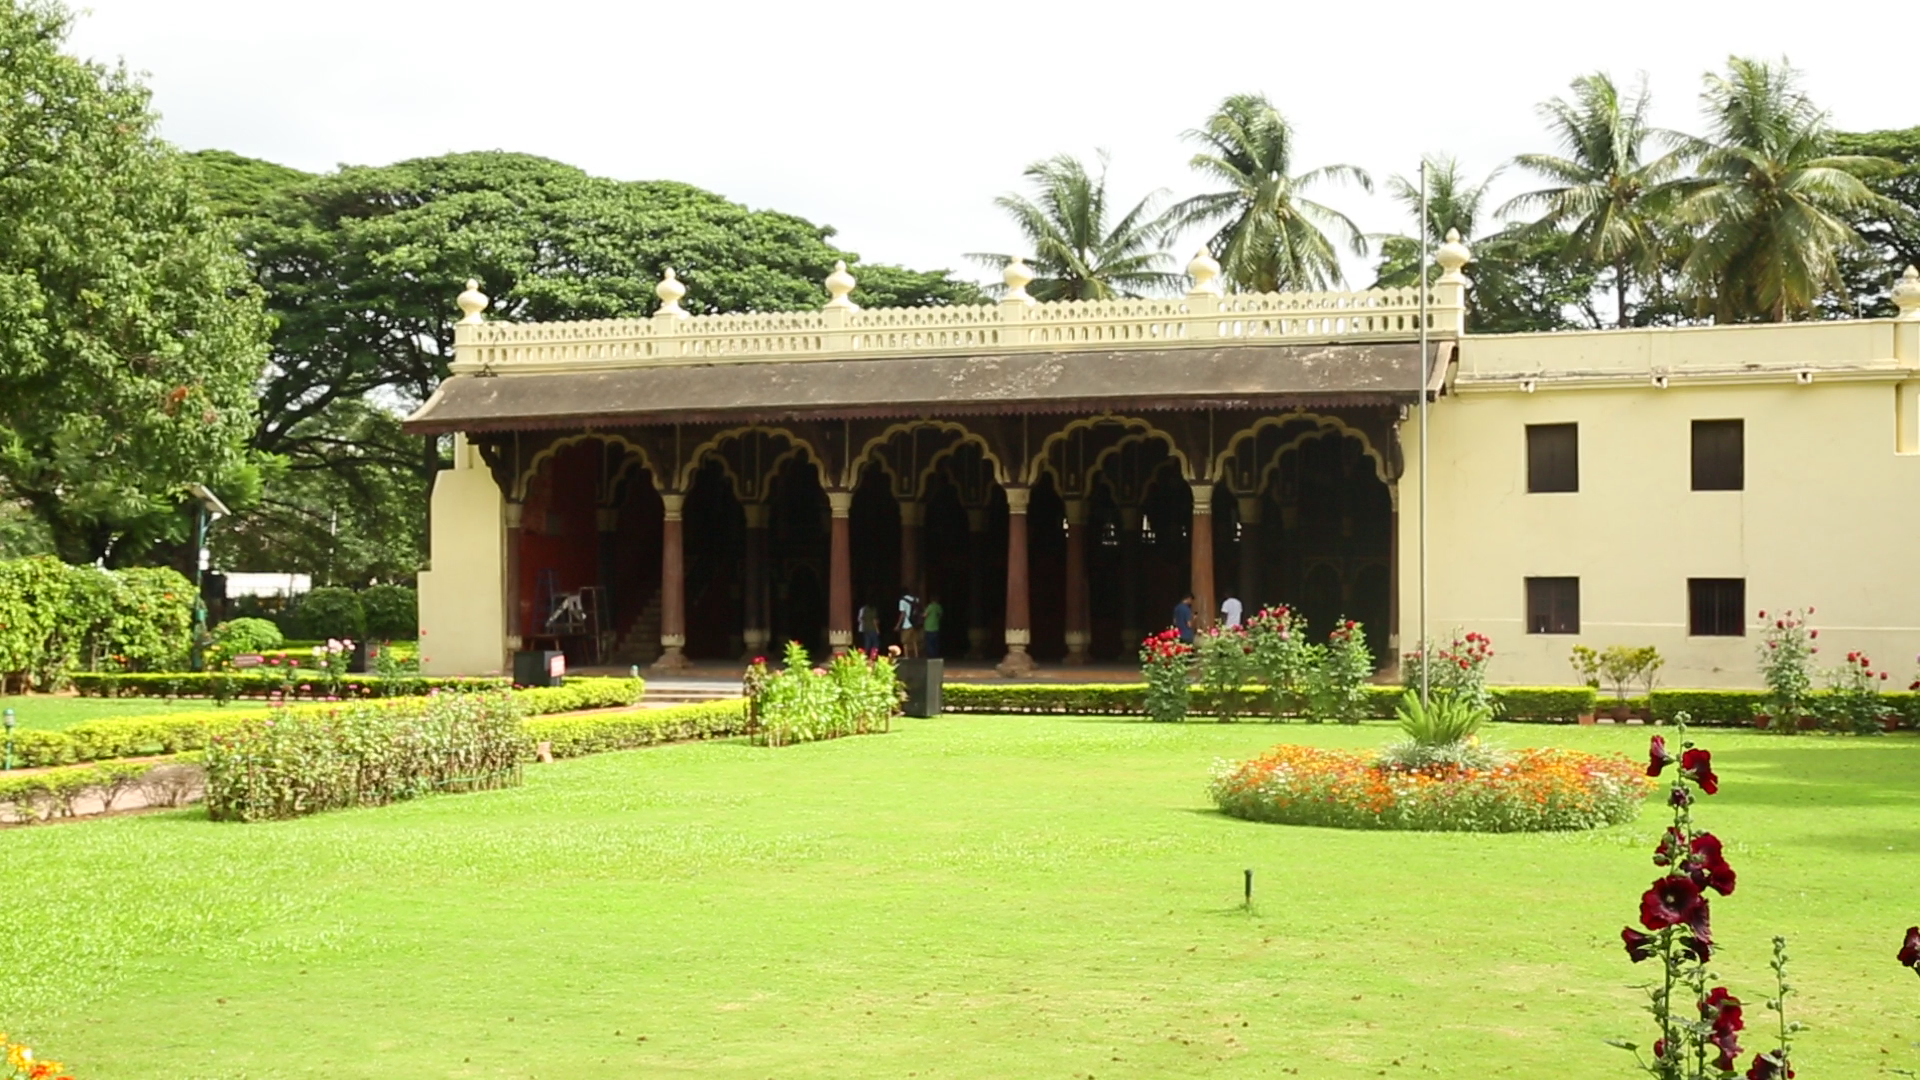 Tipu Sultan’s summer palace